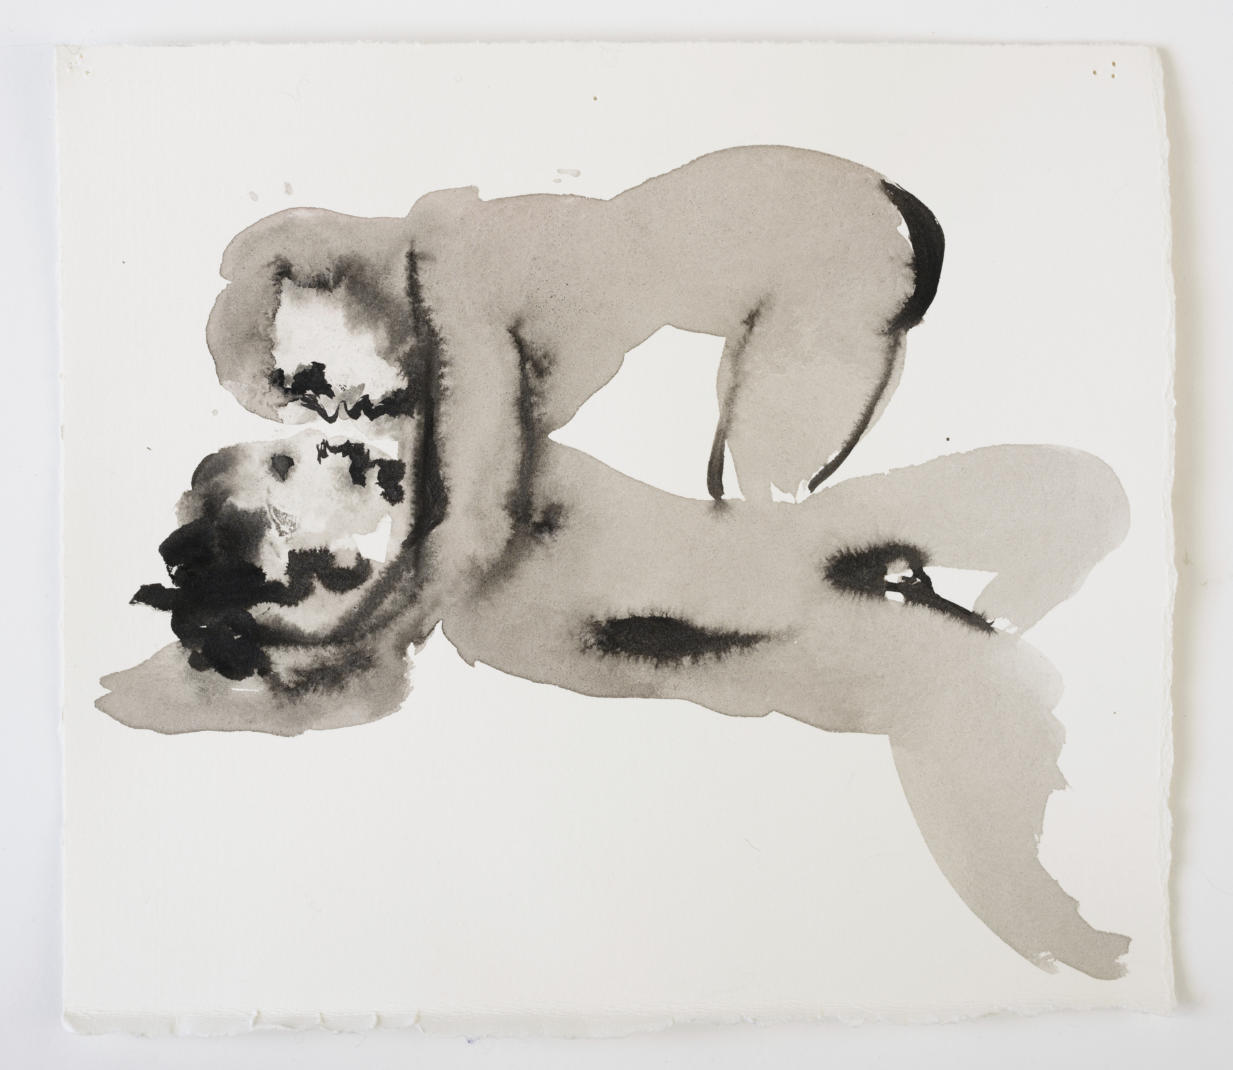 Marlene Dumas, Venus with the Body of Adonis, 2015–16. Ink wash and metallic acrylic on paper. 25,5 x 28,5 cm. Collection of the artist. © Marlene Dumas. Photo Peter Cox